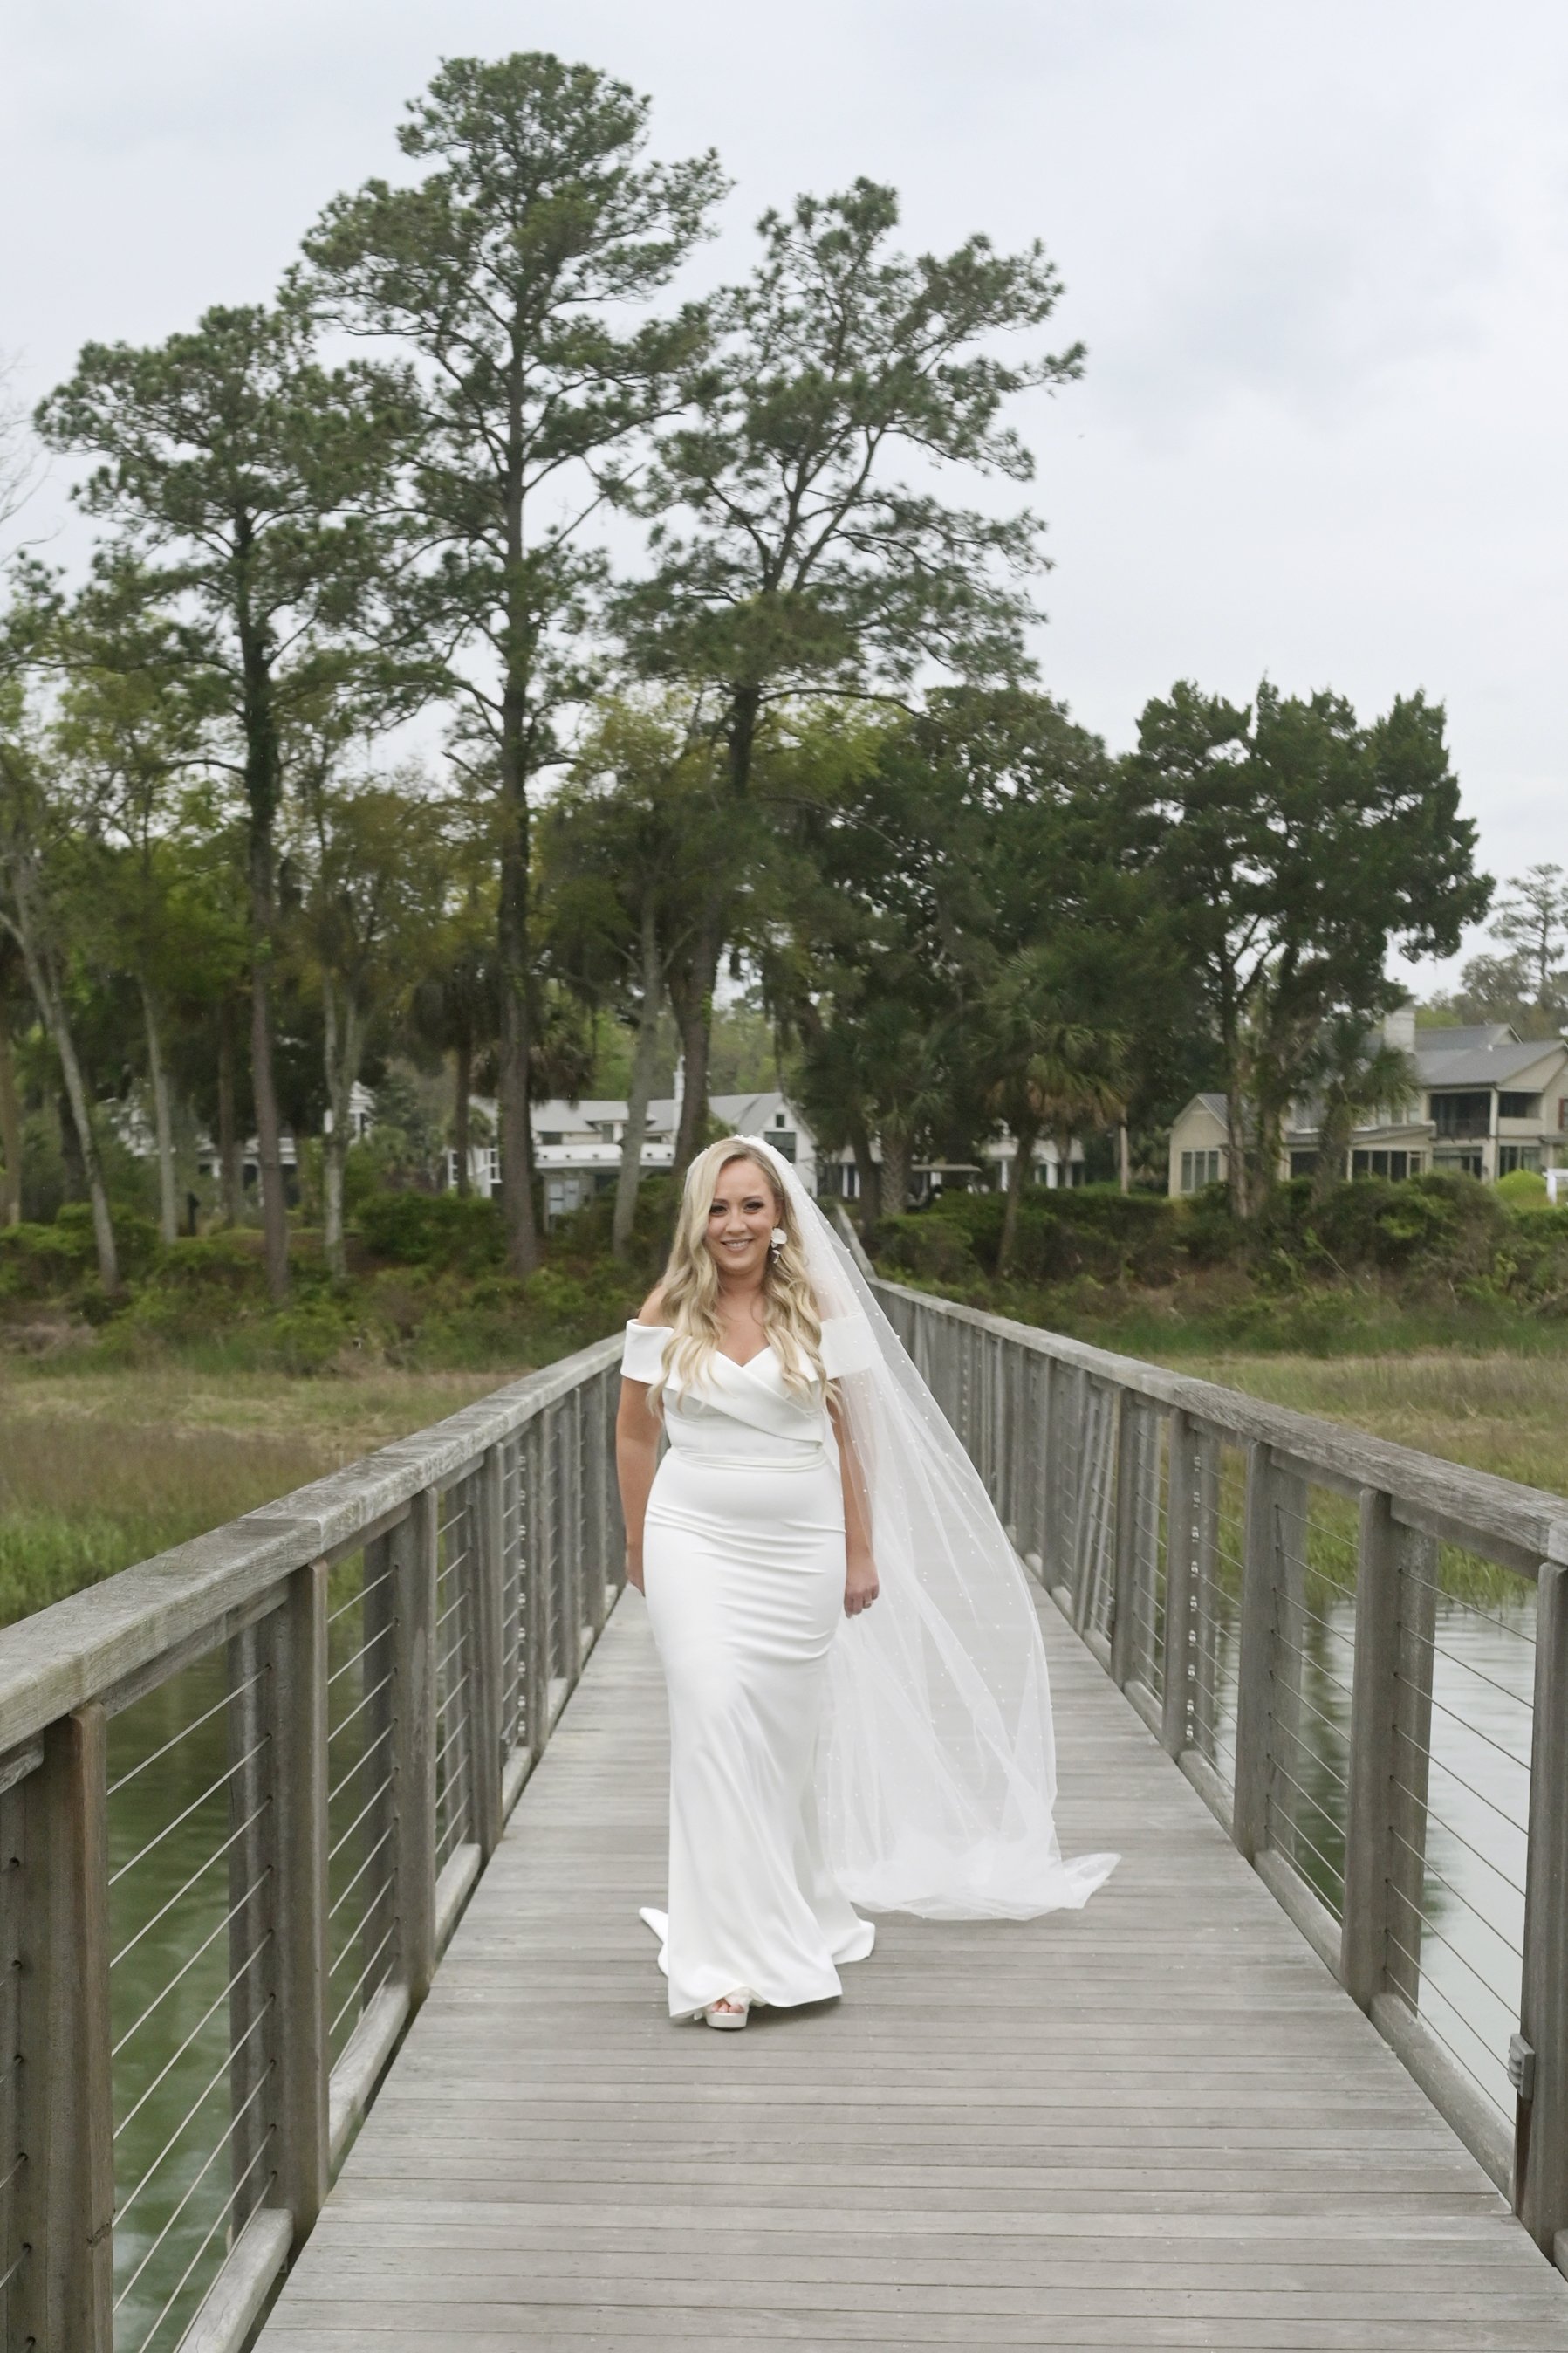 real-savanna-bride-in-the-lottie-gown-by-made-wth-love-purchased-from-savannah-bridal-shop-ivory-and-beau-savannah-bridal-boutique-savannah-wedding-gowns-savannah-wedding-dresses-2.JPG